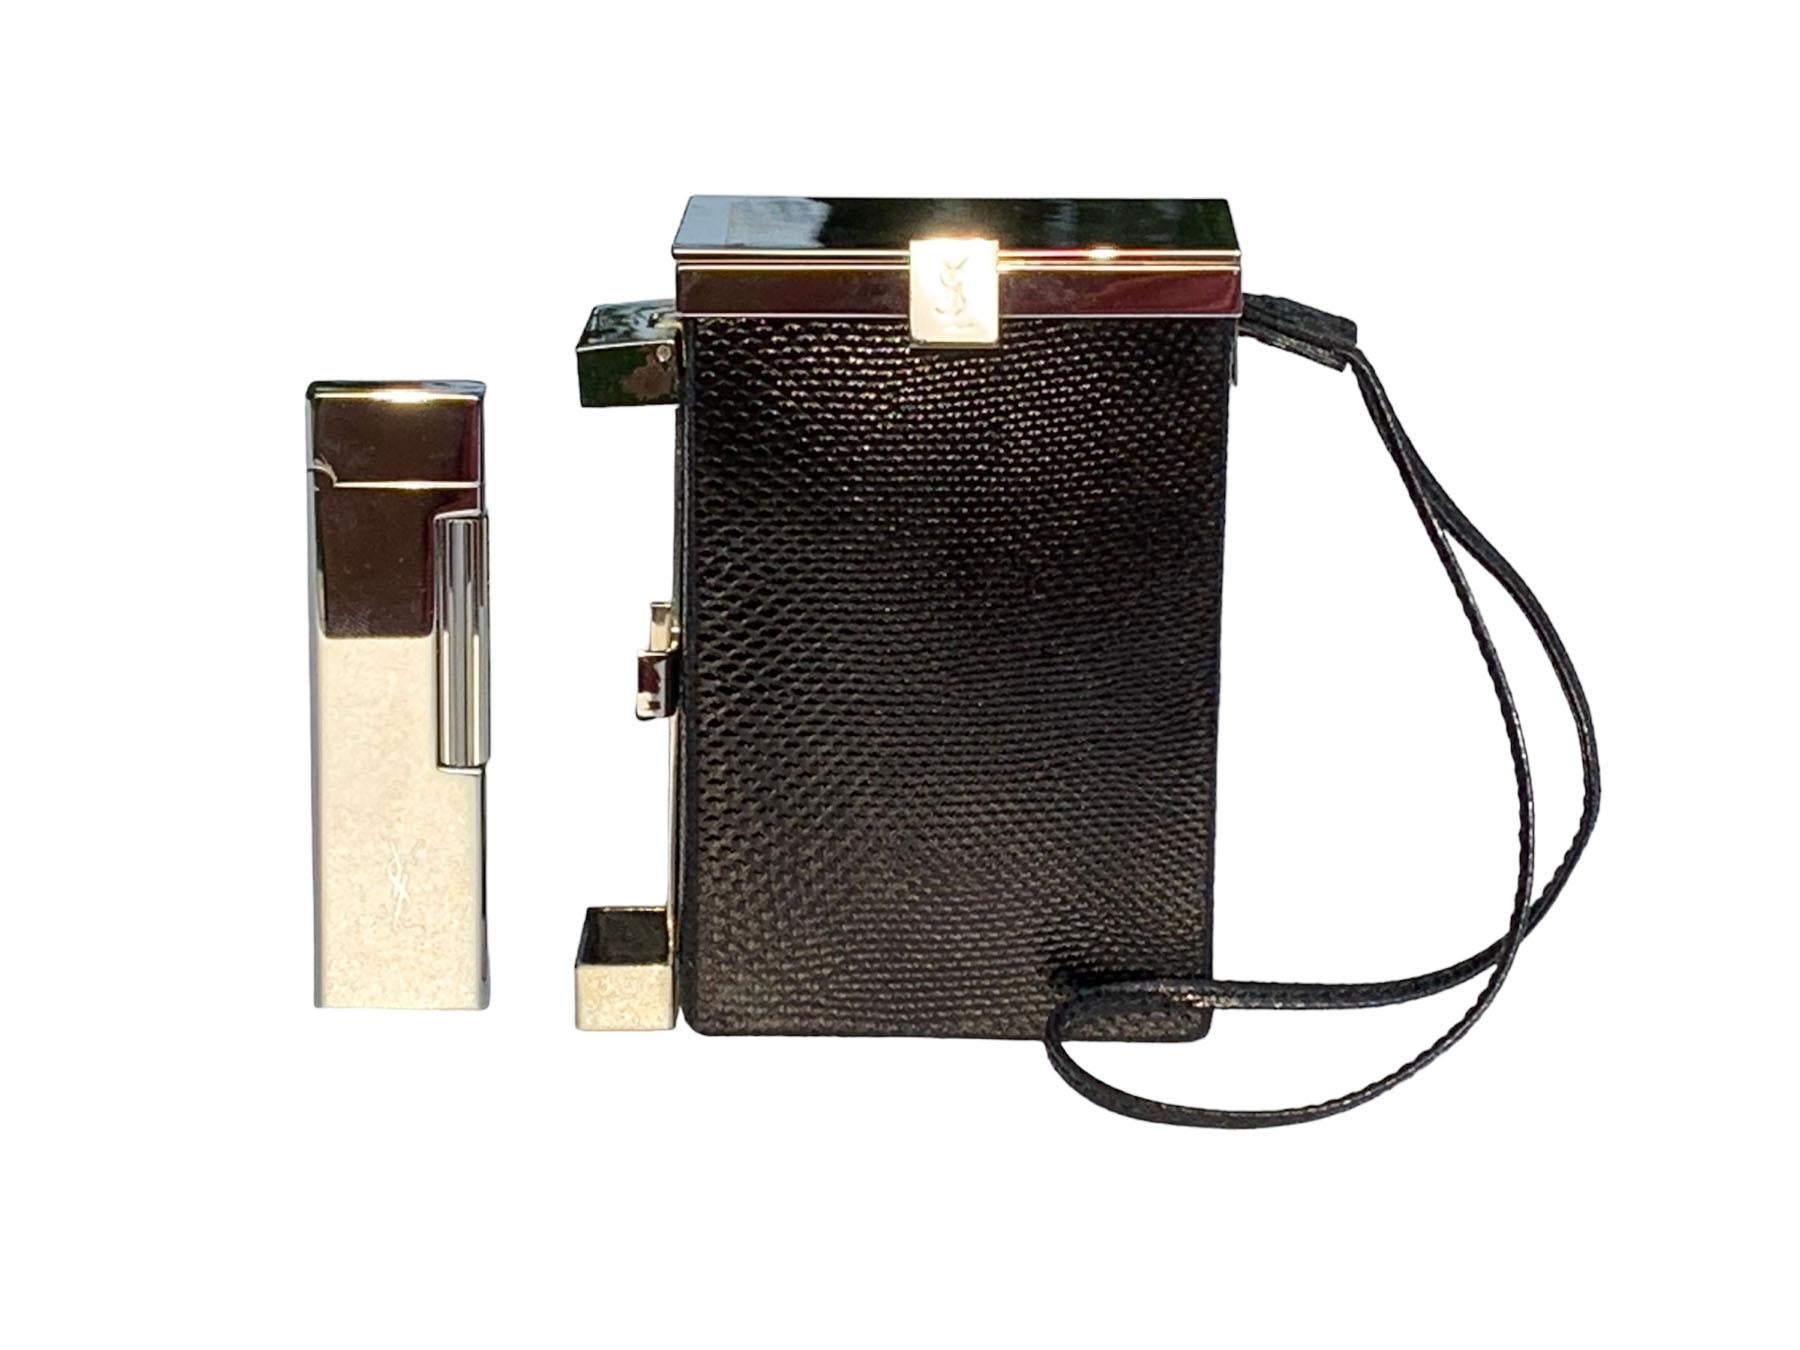 NWT Tom Ford for Yves Saint Laurent S/S 2001 Leather Cigarette Case and Lighter  For Sale 1